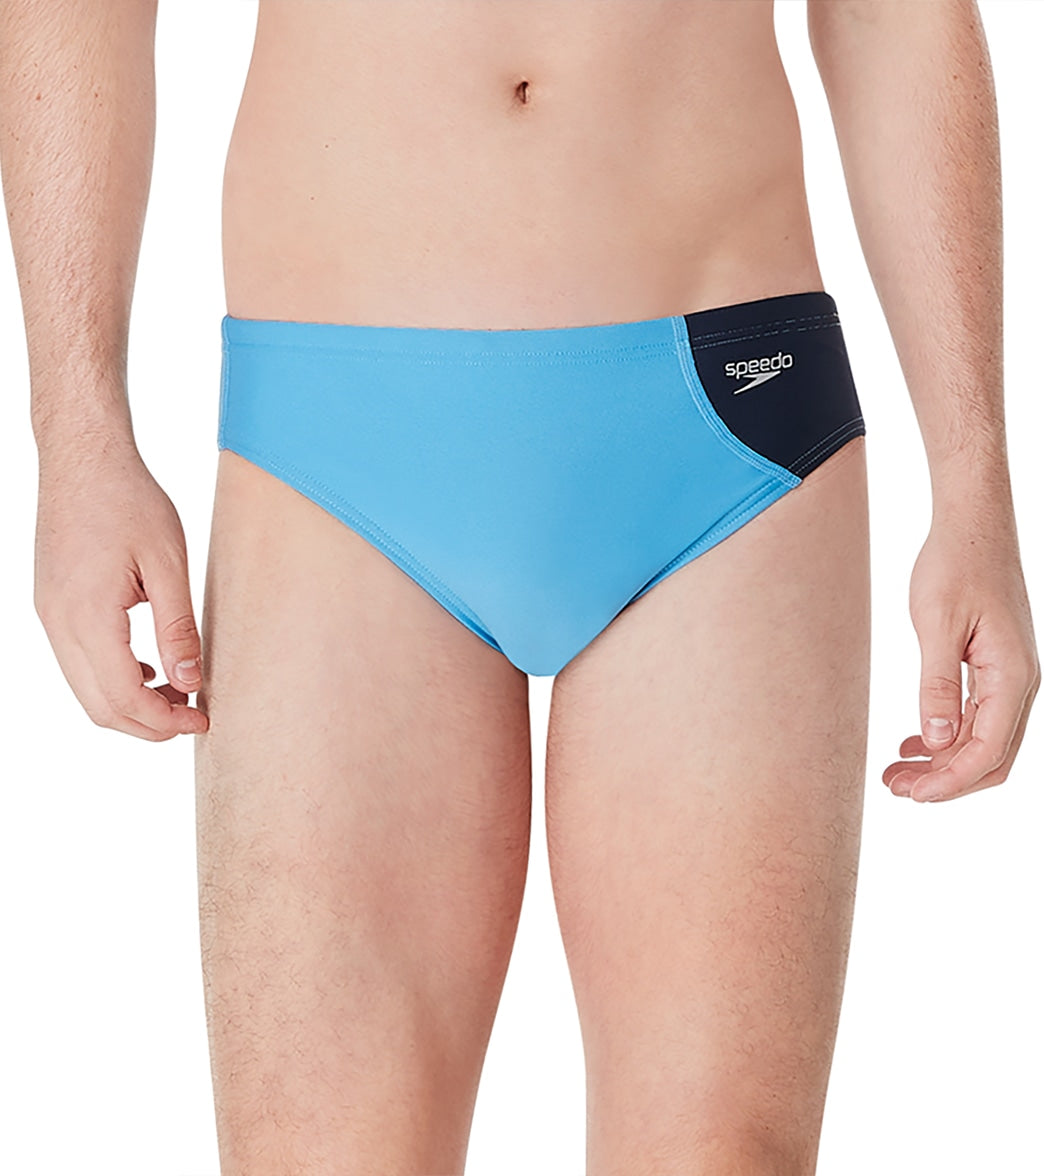 Speedo Vibe Men's Assymetrical Colorblock One Brief Swimsuit at